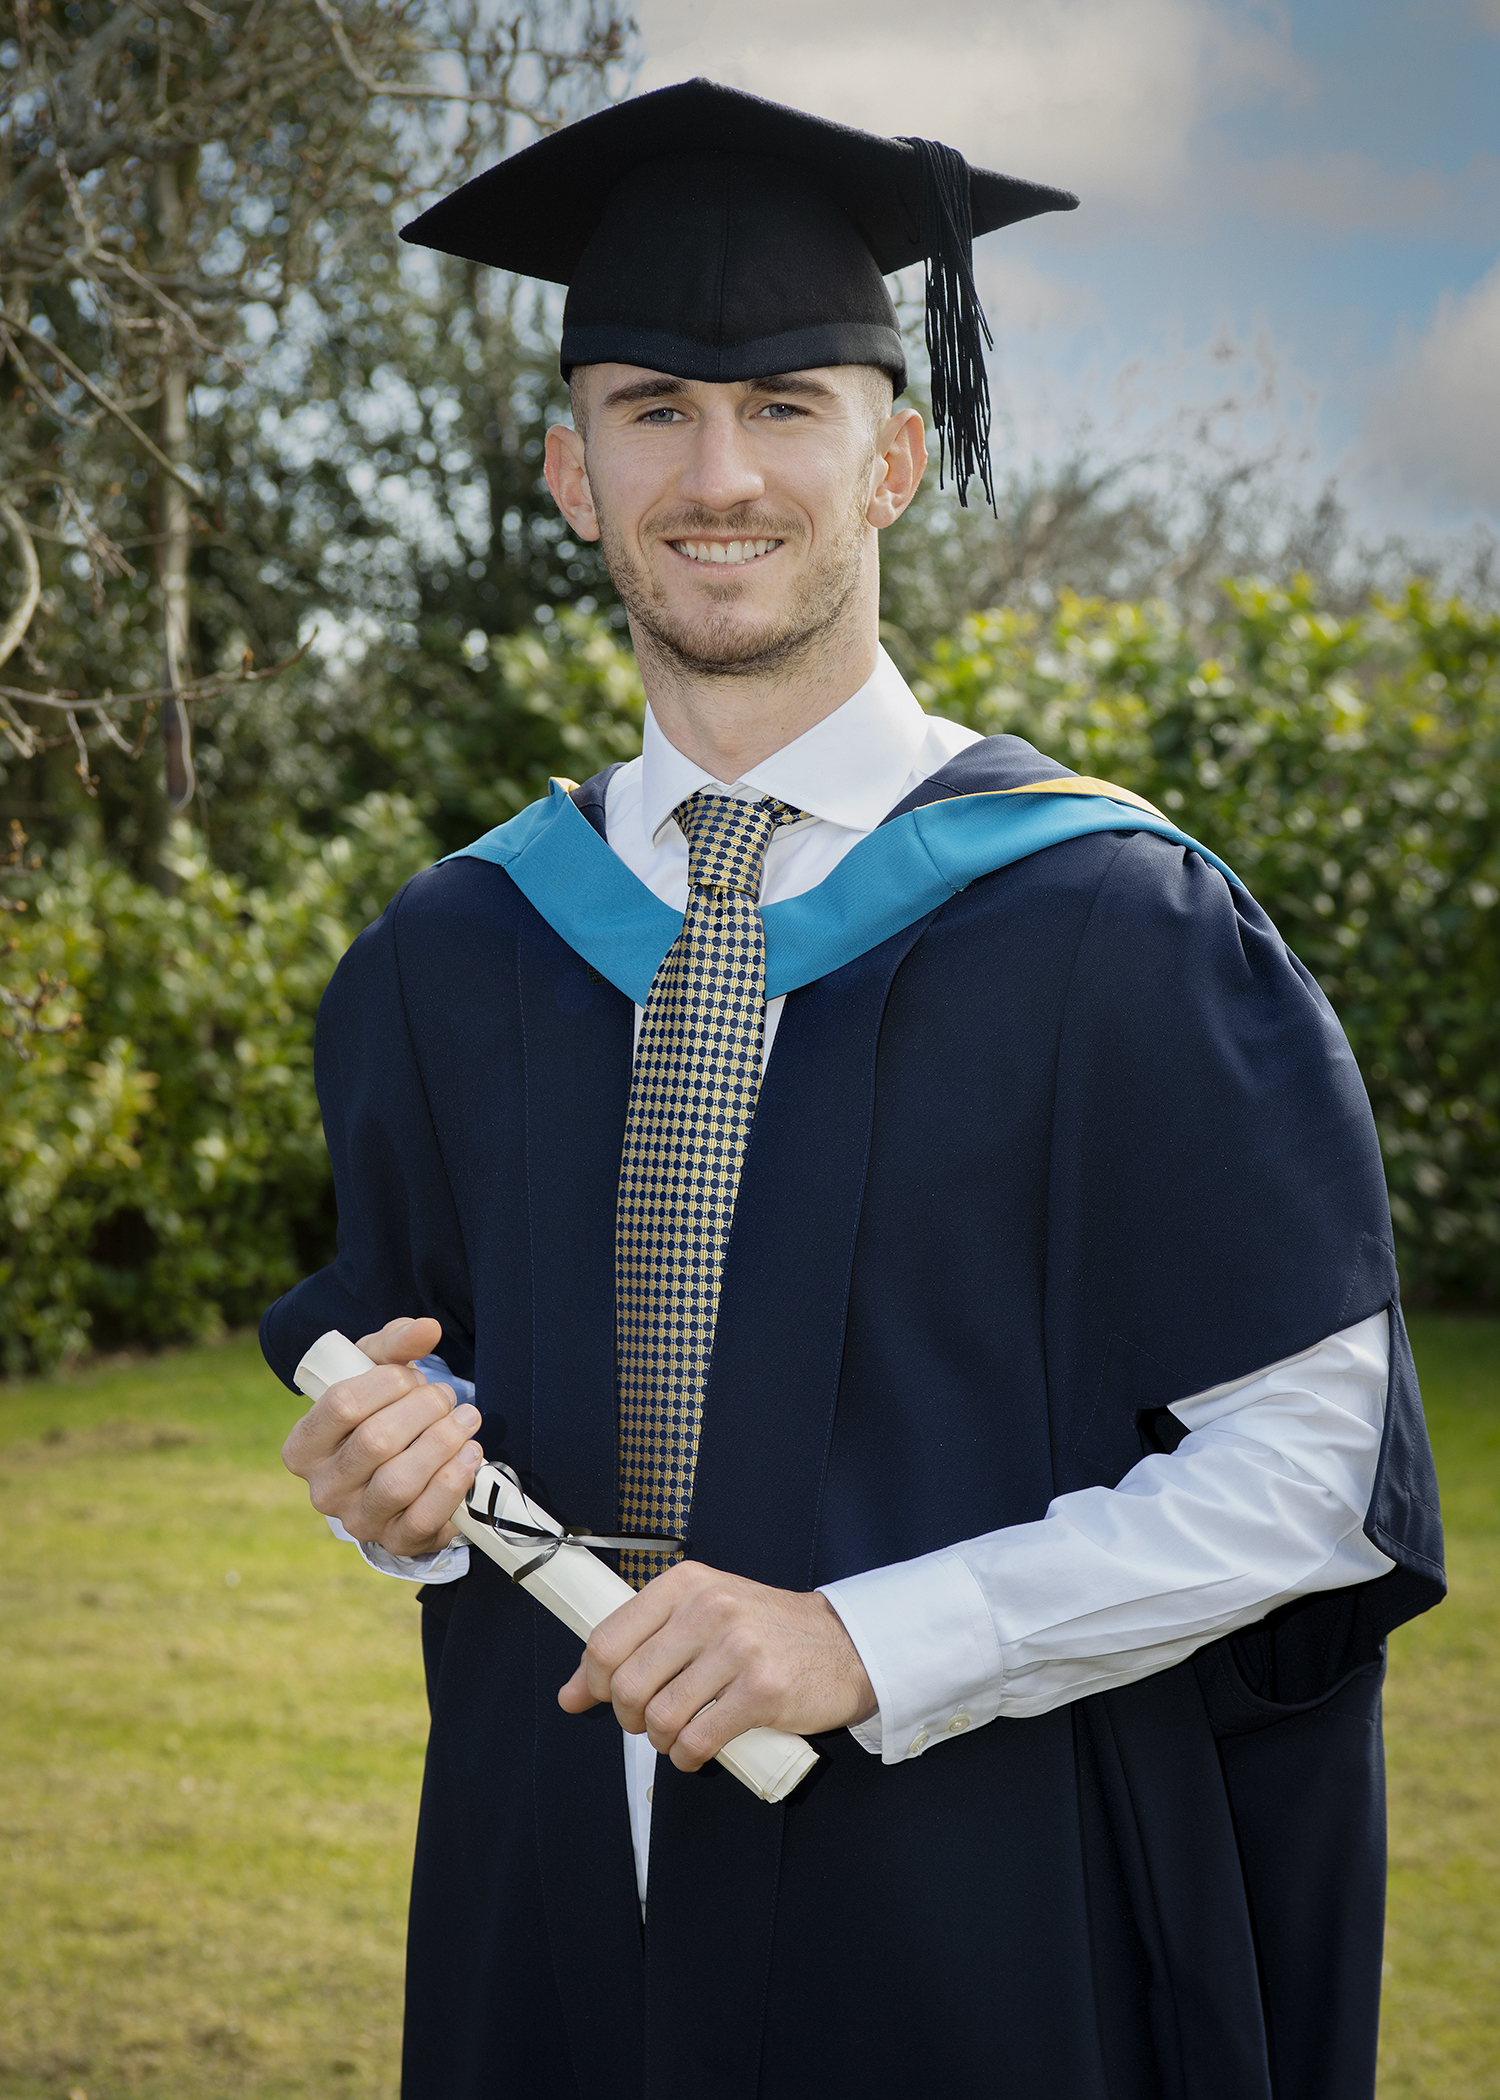 Dominic has graduated from the Open University. Credit: Studio 86 Photography